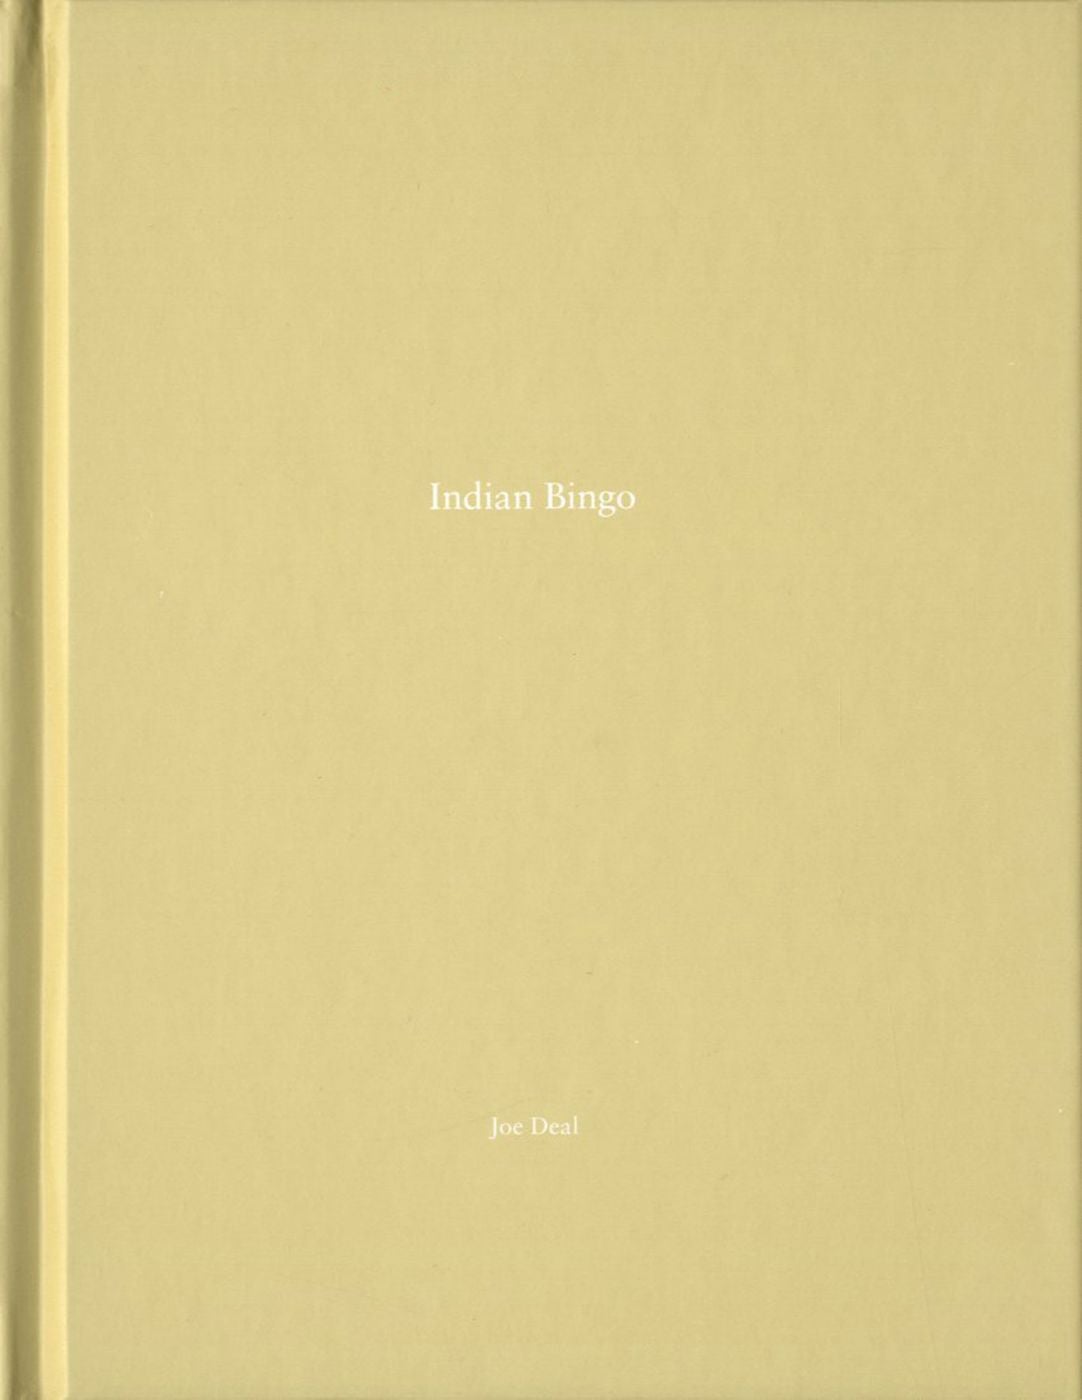 Joe Deal: Indian Bingo (One Picture Book #53), Limited Edition (with Print)